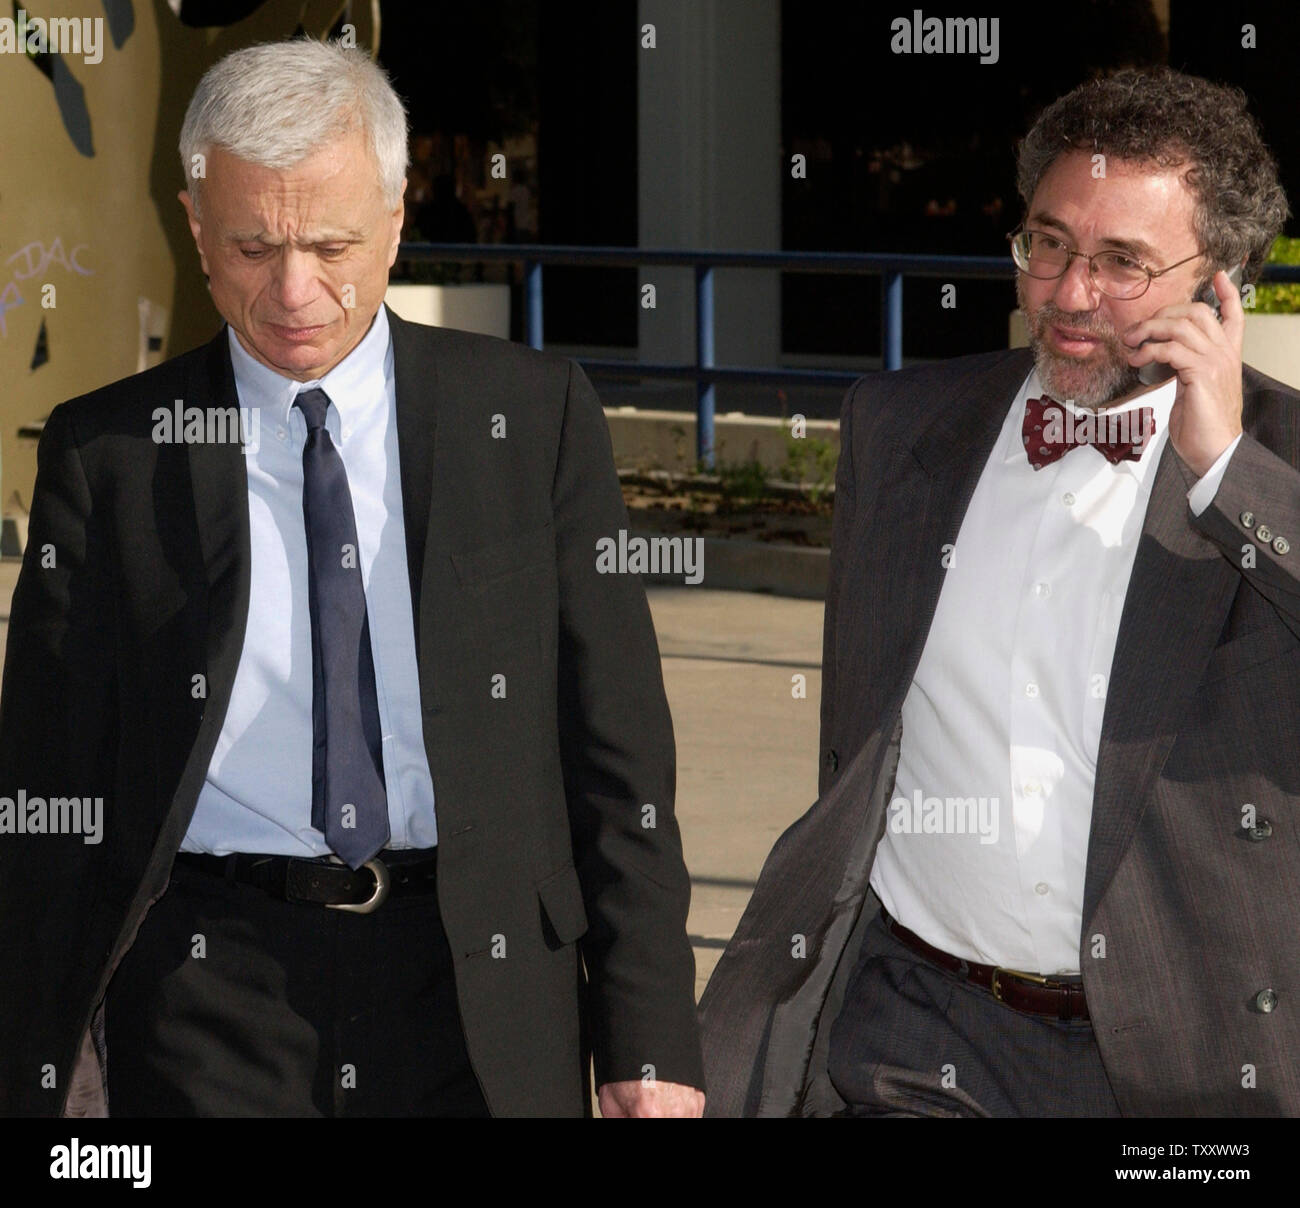 Actor Robert Blake (L) and his attorney M. Gerald Schwartzbach depart the Van Nuys courthouse after attending a court session in his murder trial, in Los Angeles March 15, 2005. Jurors in 'Baretta' star Robert Blake's murder trial continue after more than a week of deliberations without a verdict, increasing speculation they may deadlock over whether the actor shot and killed his wife outside his favorite restaurant.   (UPI Photo/Jim Ruymen) Stock Photo